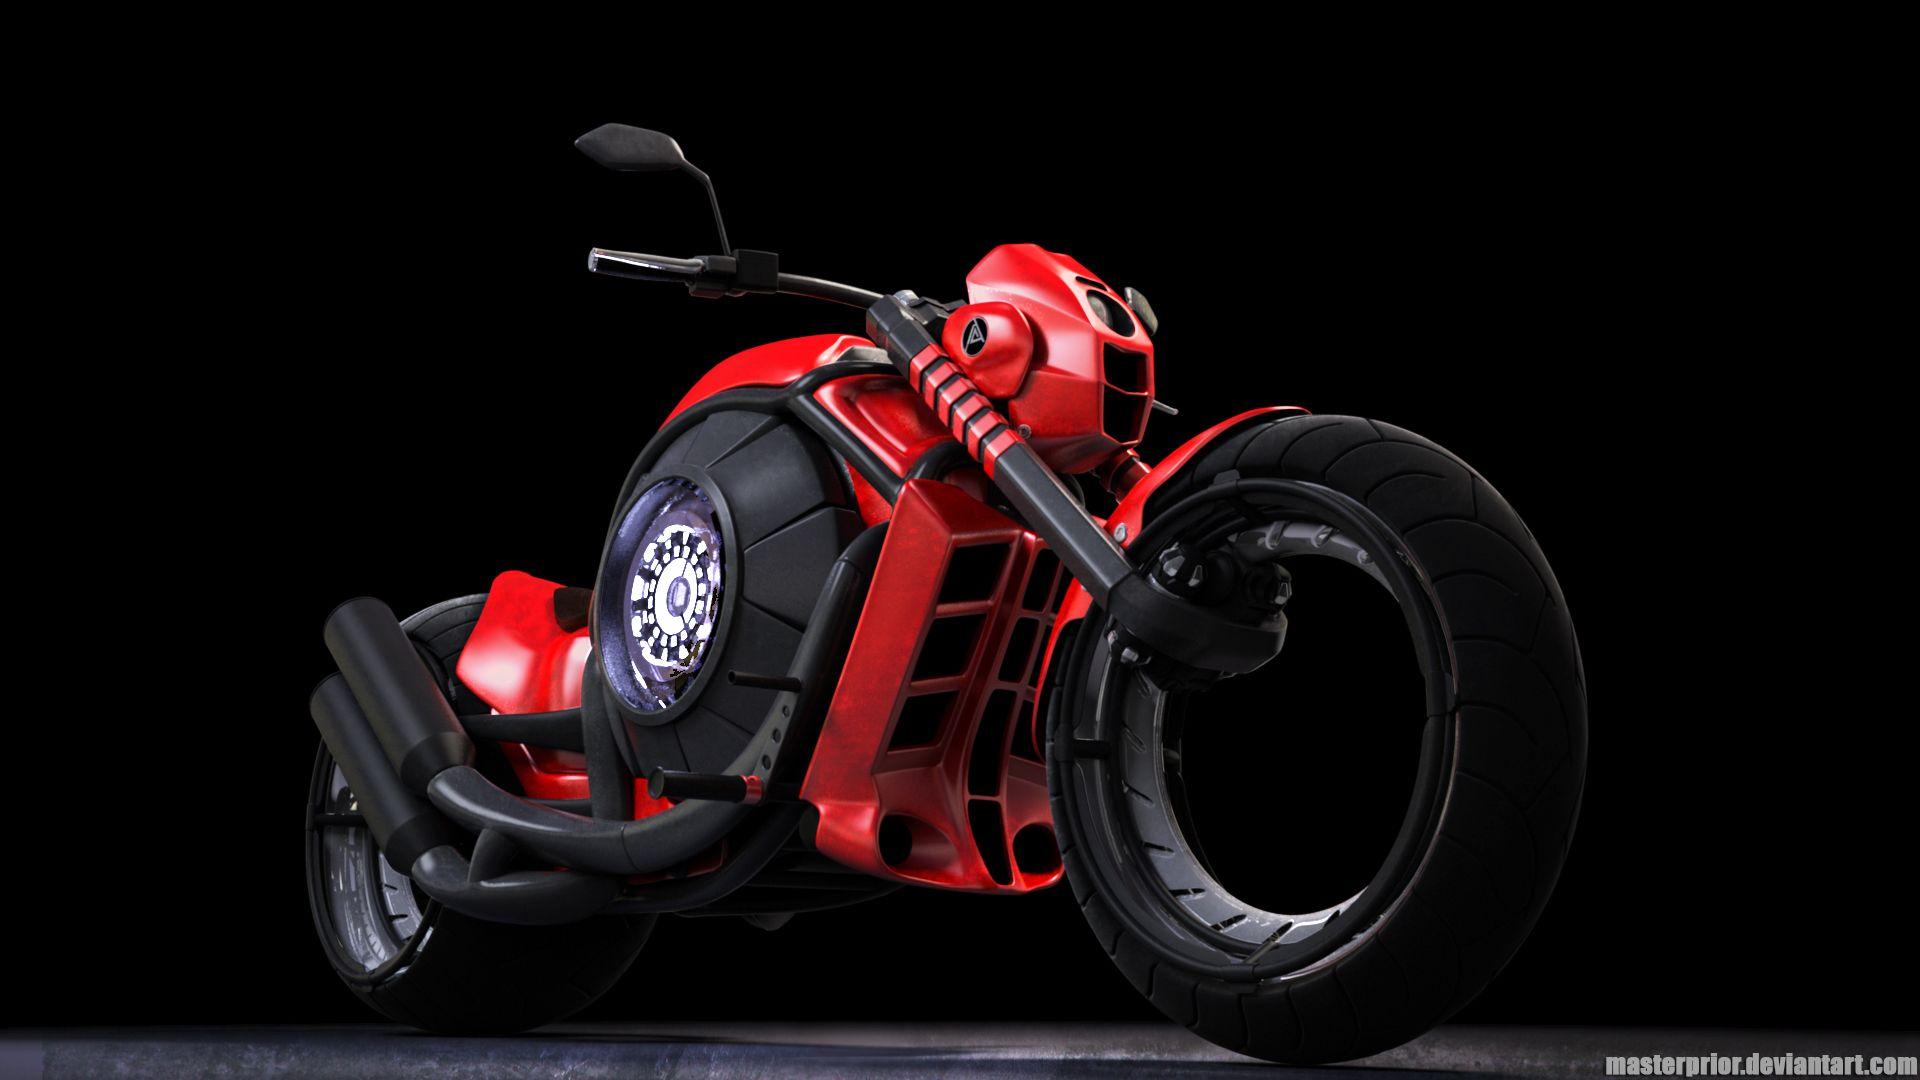 Futuristic Motorcycle Wallpapers - Top Free Futuristic Motorcycle